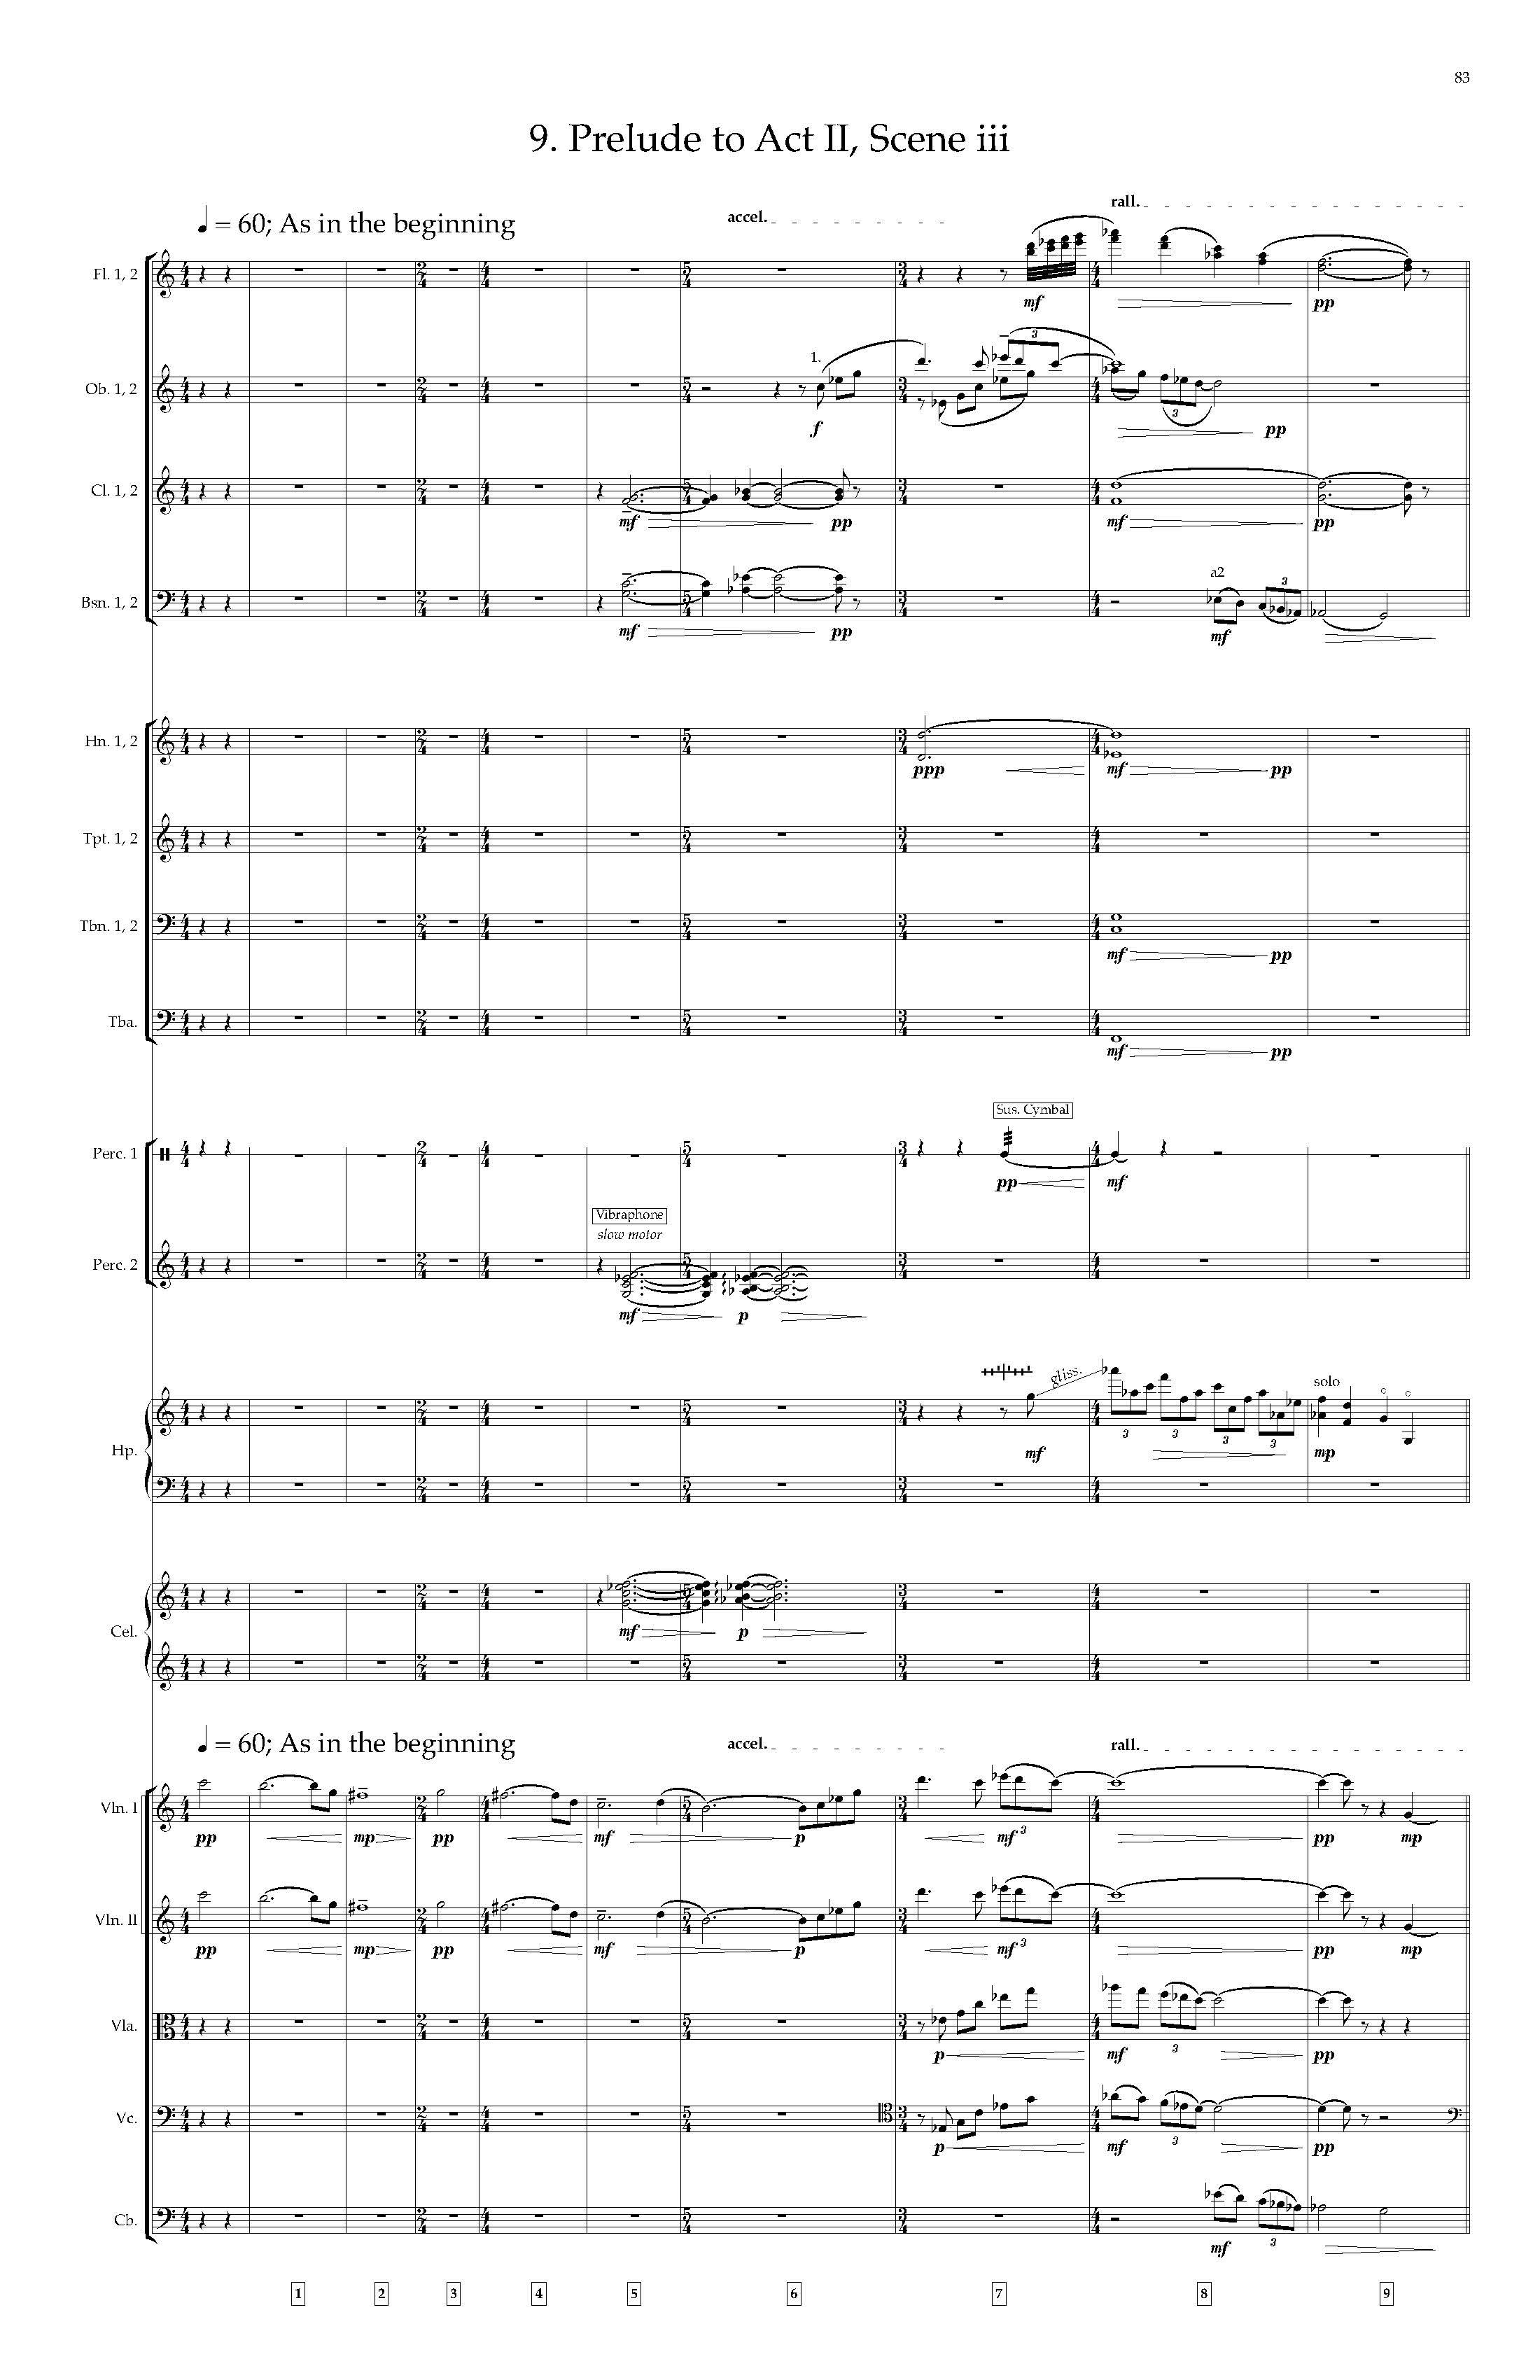 Arias and Interludes from HWGS - Complete Score_Page_89.jpg